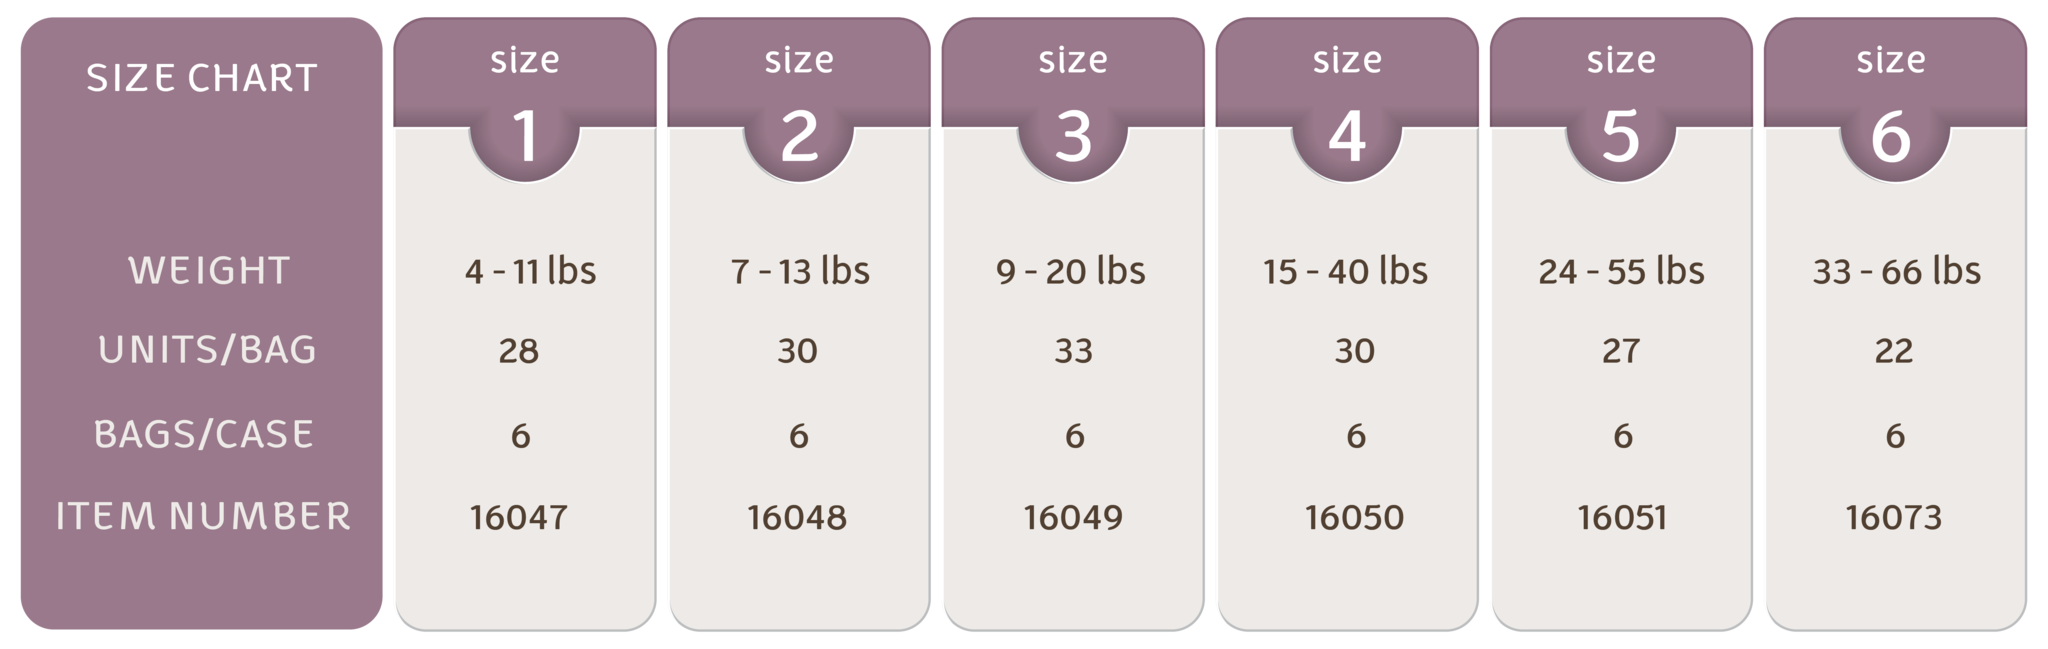 Pampers Diaper Size Chart By Weight